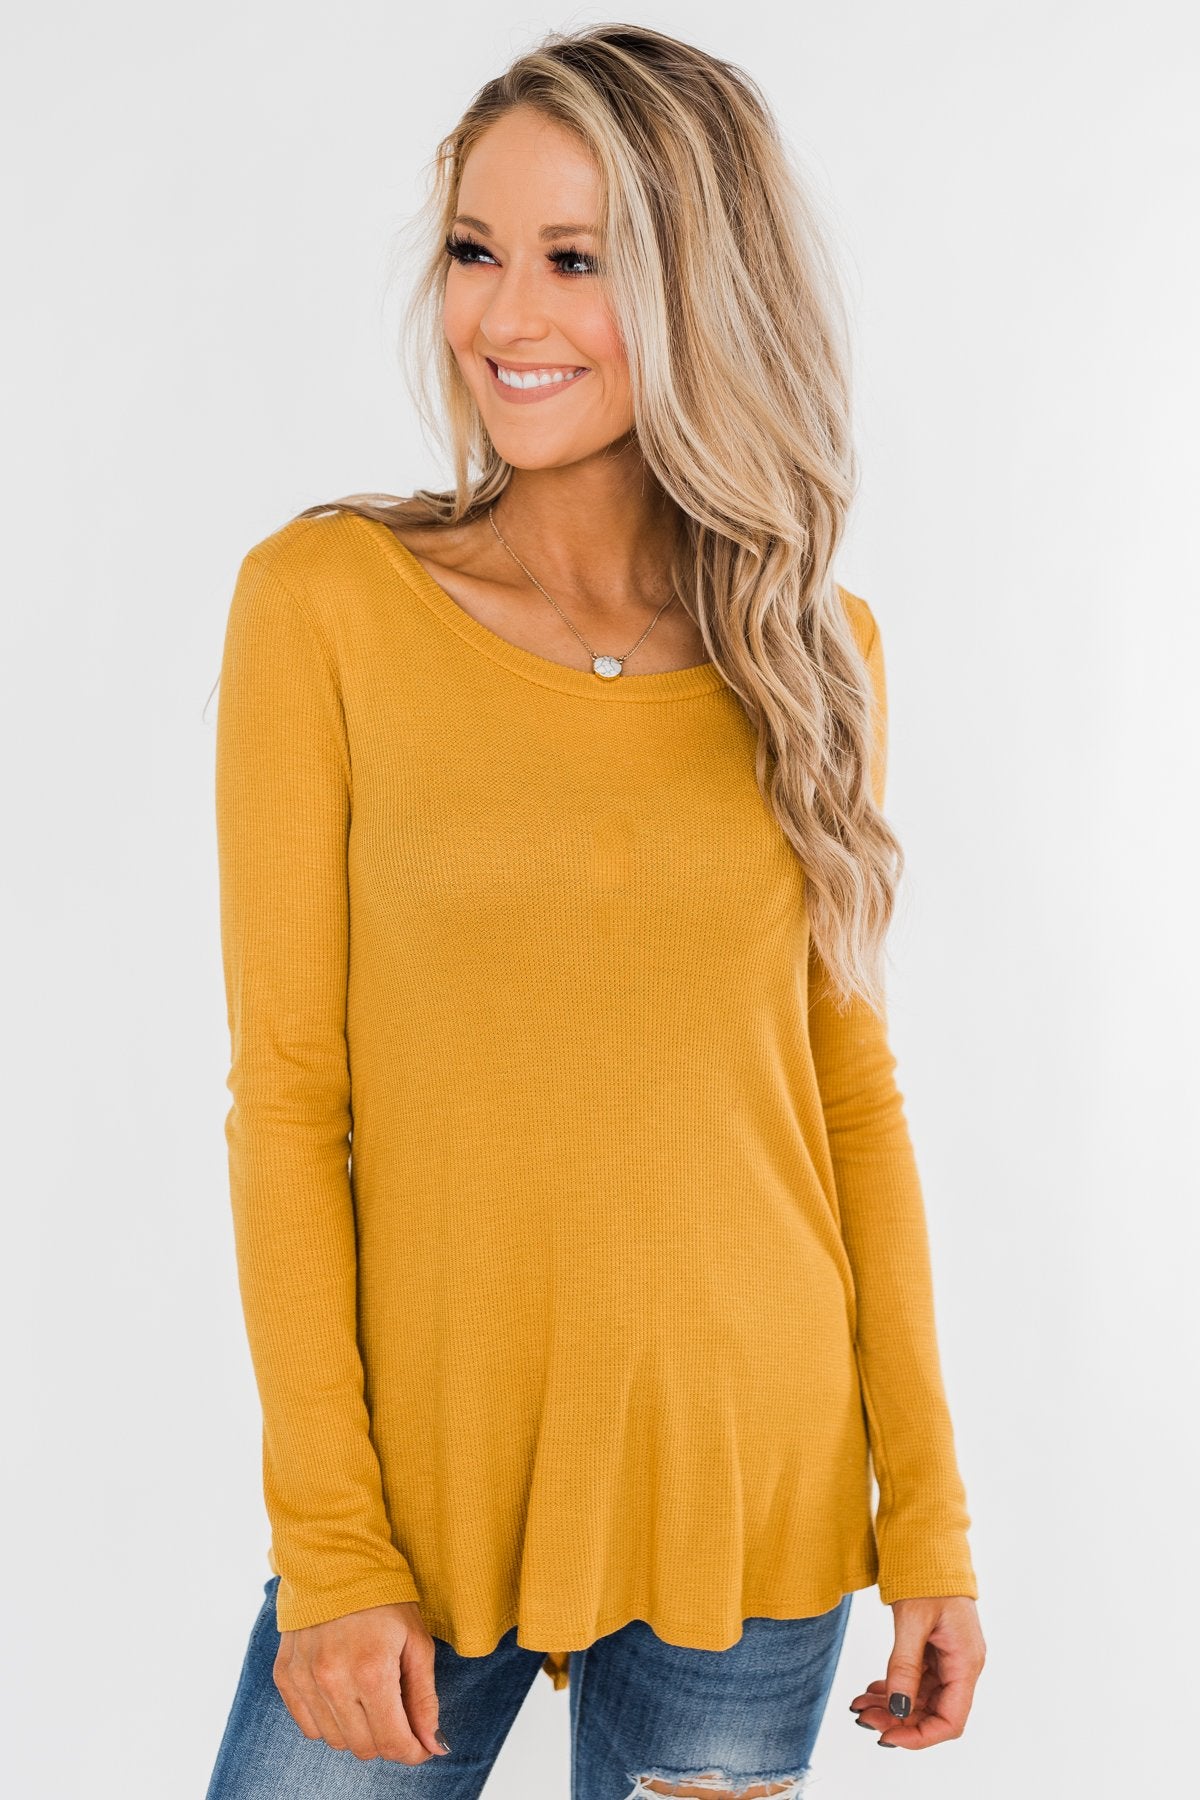 The Best I Can Long Sleeve Top- Mustard